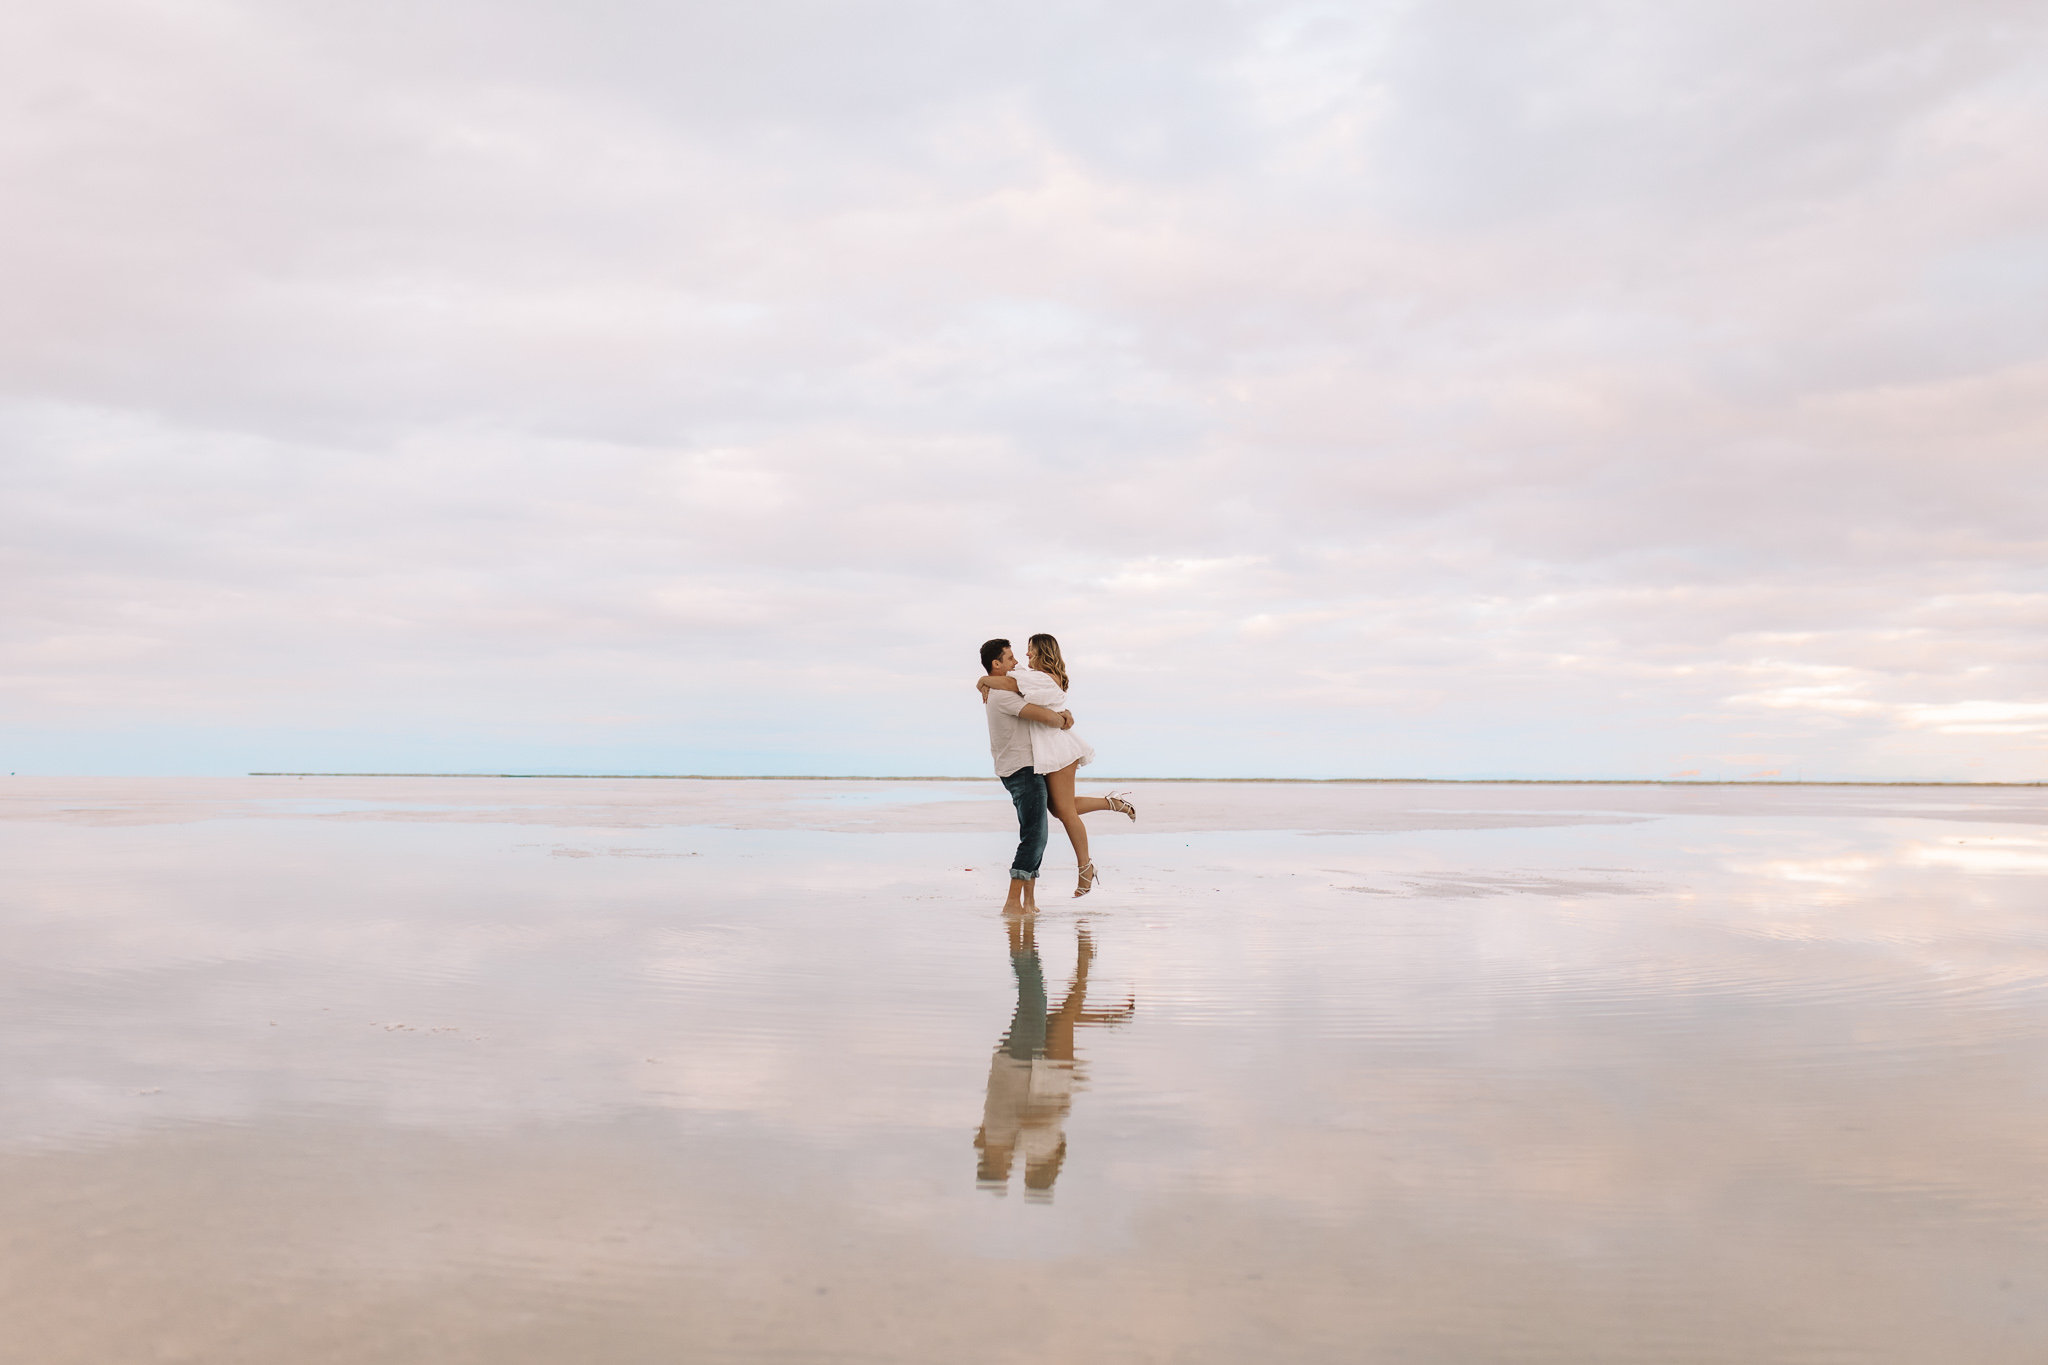 Salt Flats Elopement couple during blue hour, pink sky reflected in flooded flats